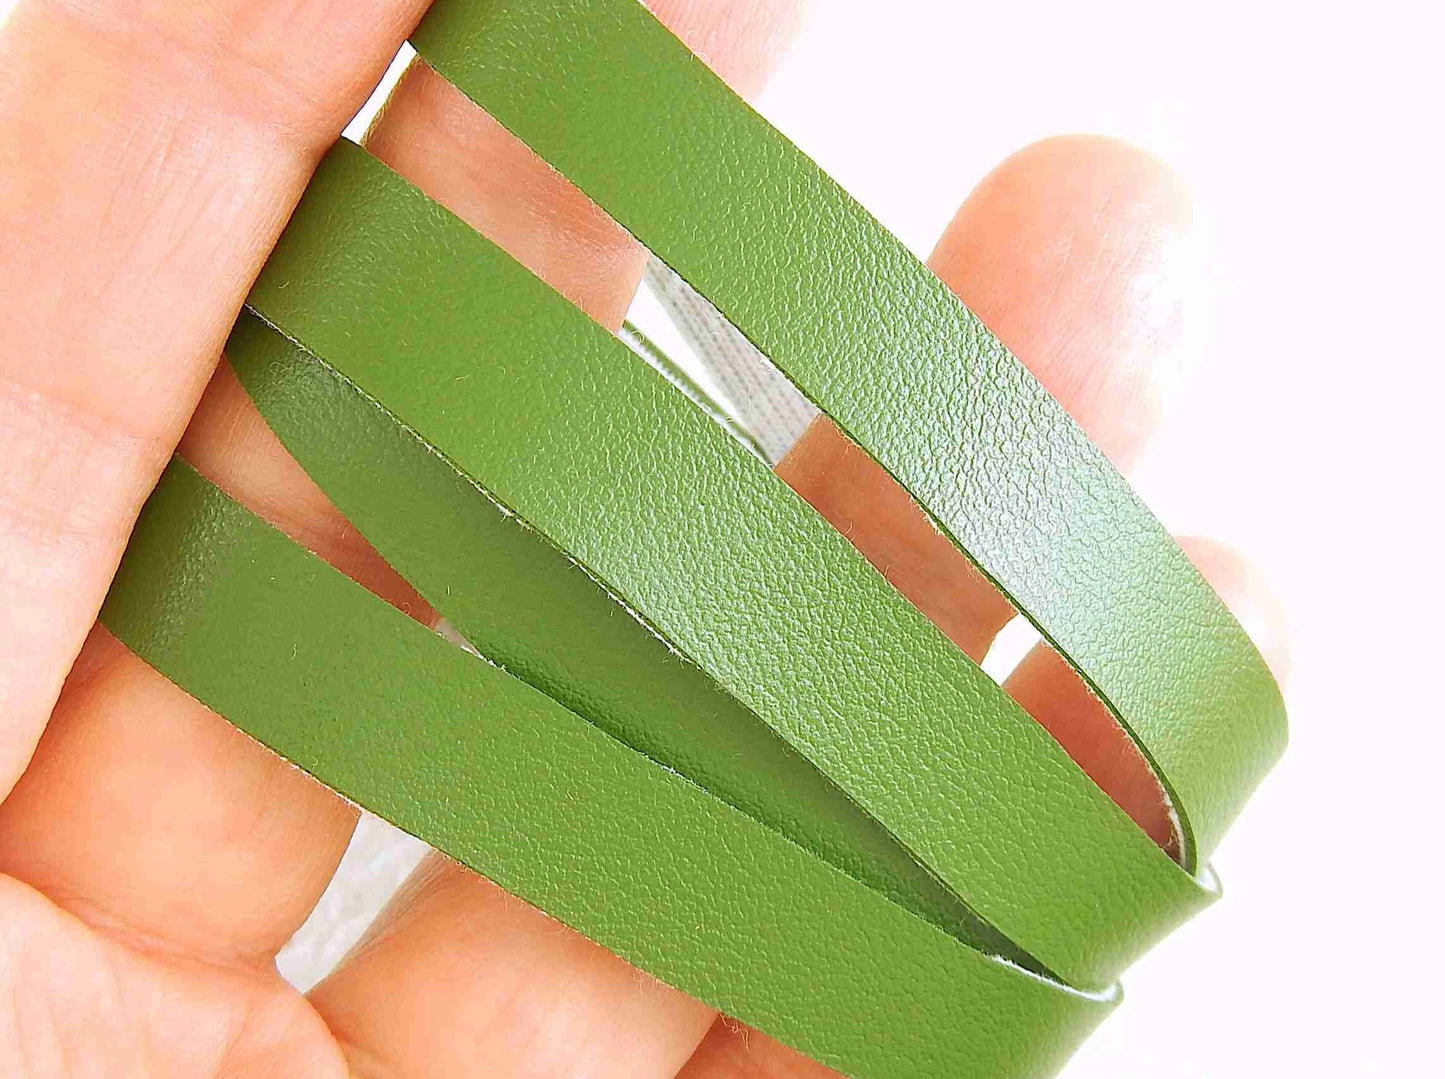 20mm wrap bracelet made of cactus leather in 3 colours (apple green, tan, black), magnetic stainless steel clasp